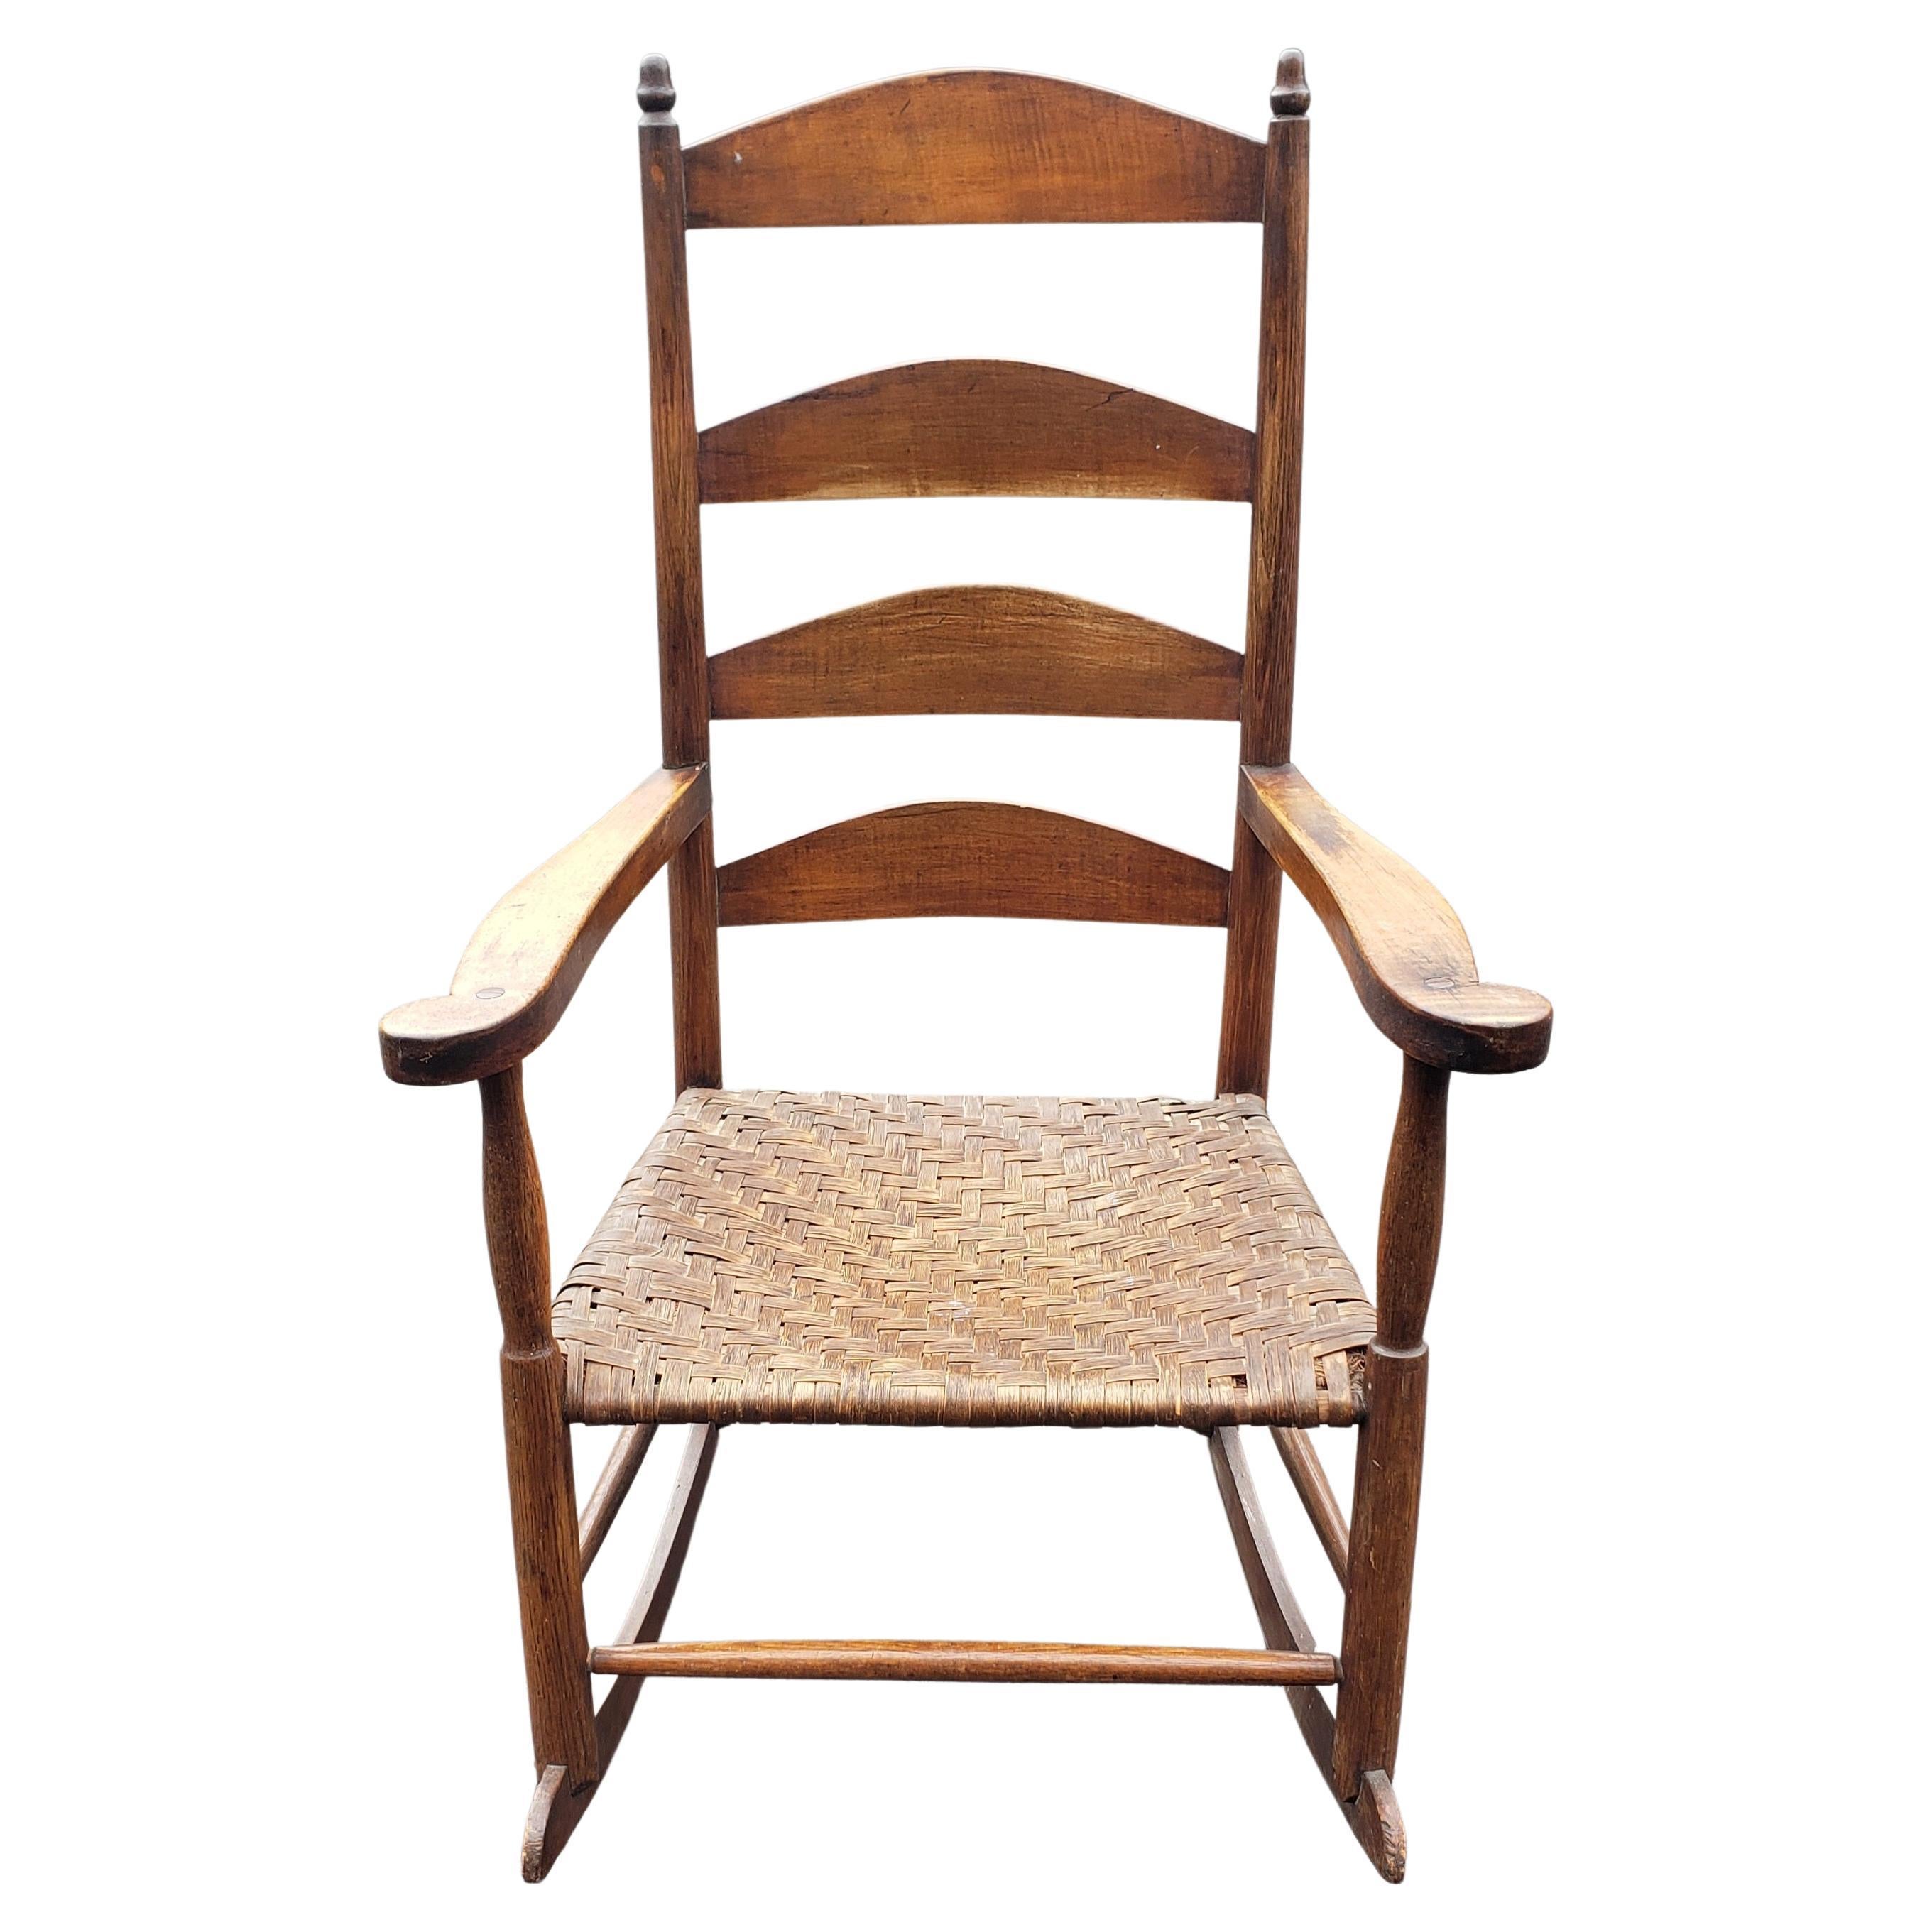 Early American Walnut Ladder Back Rocking Chair w/ Double Sided Split Reed Seat For Sale